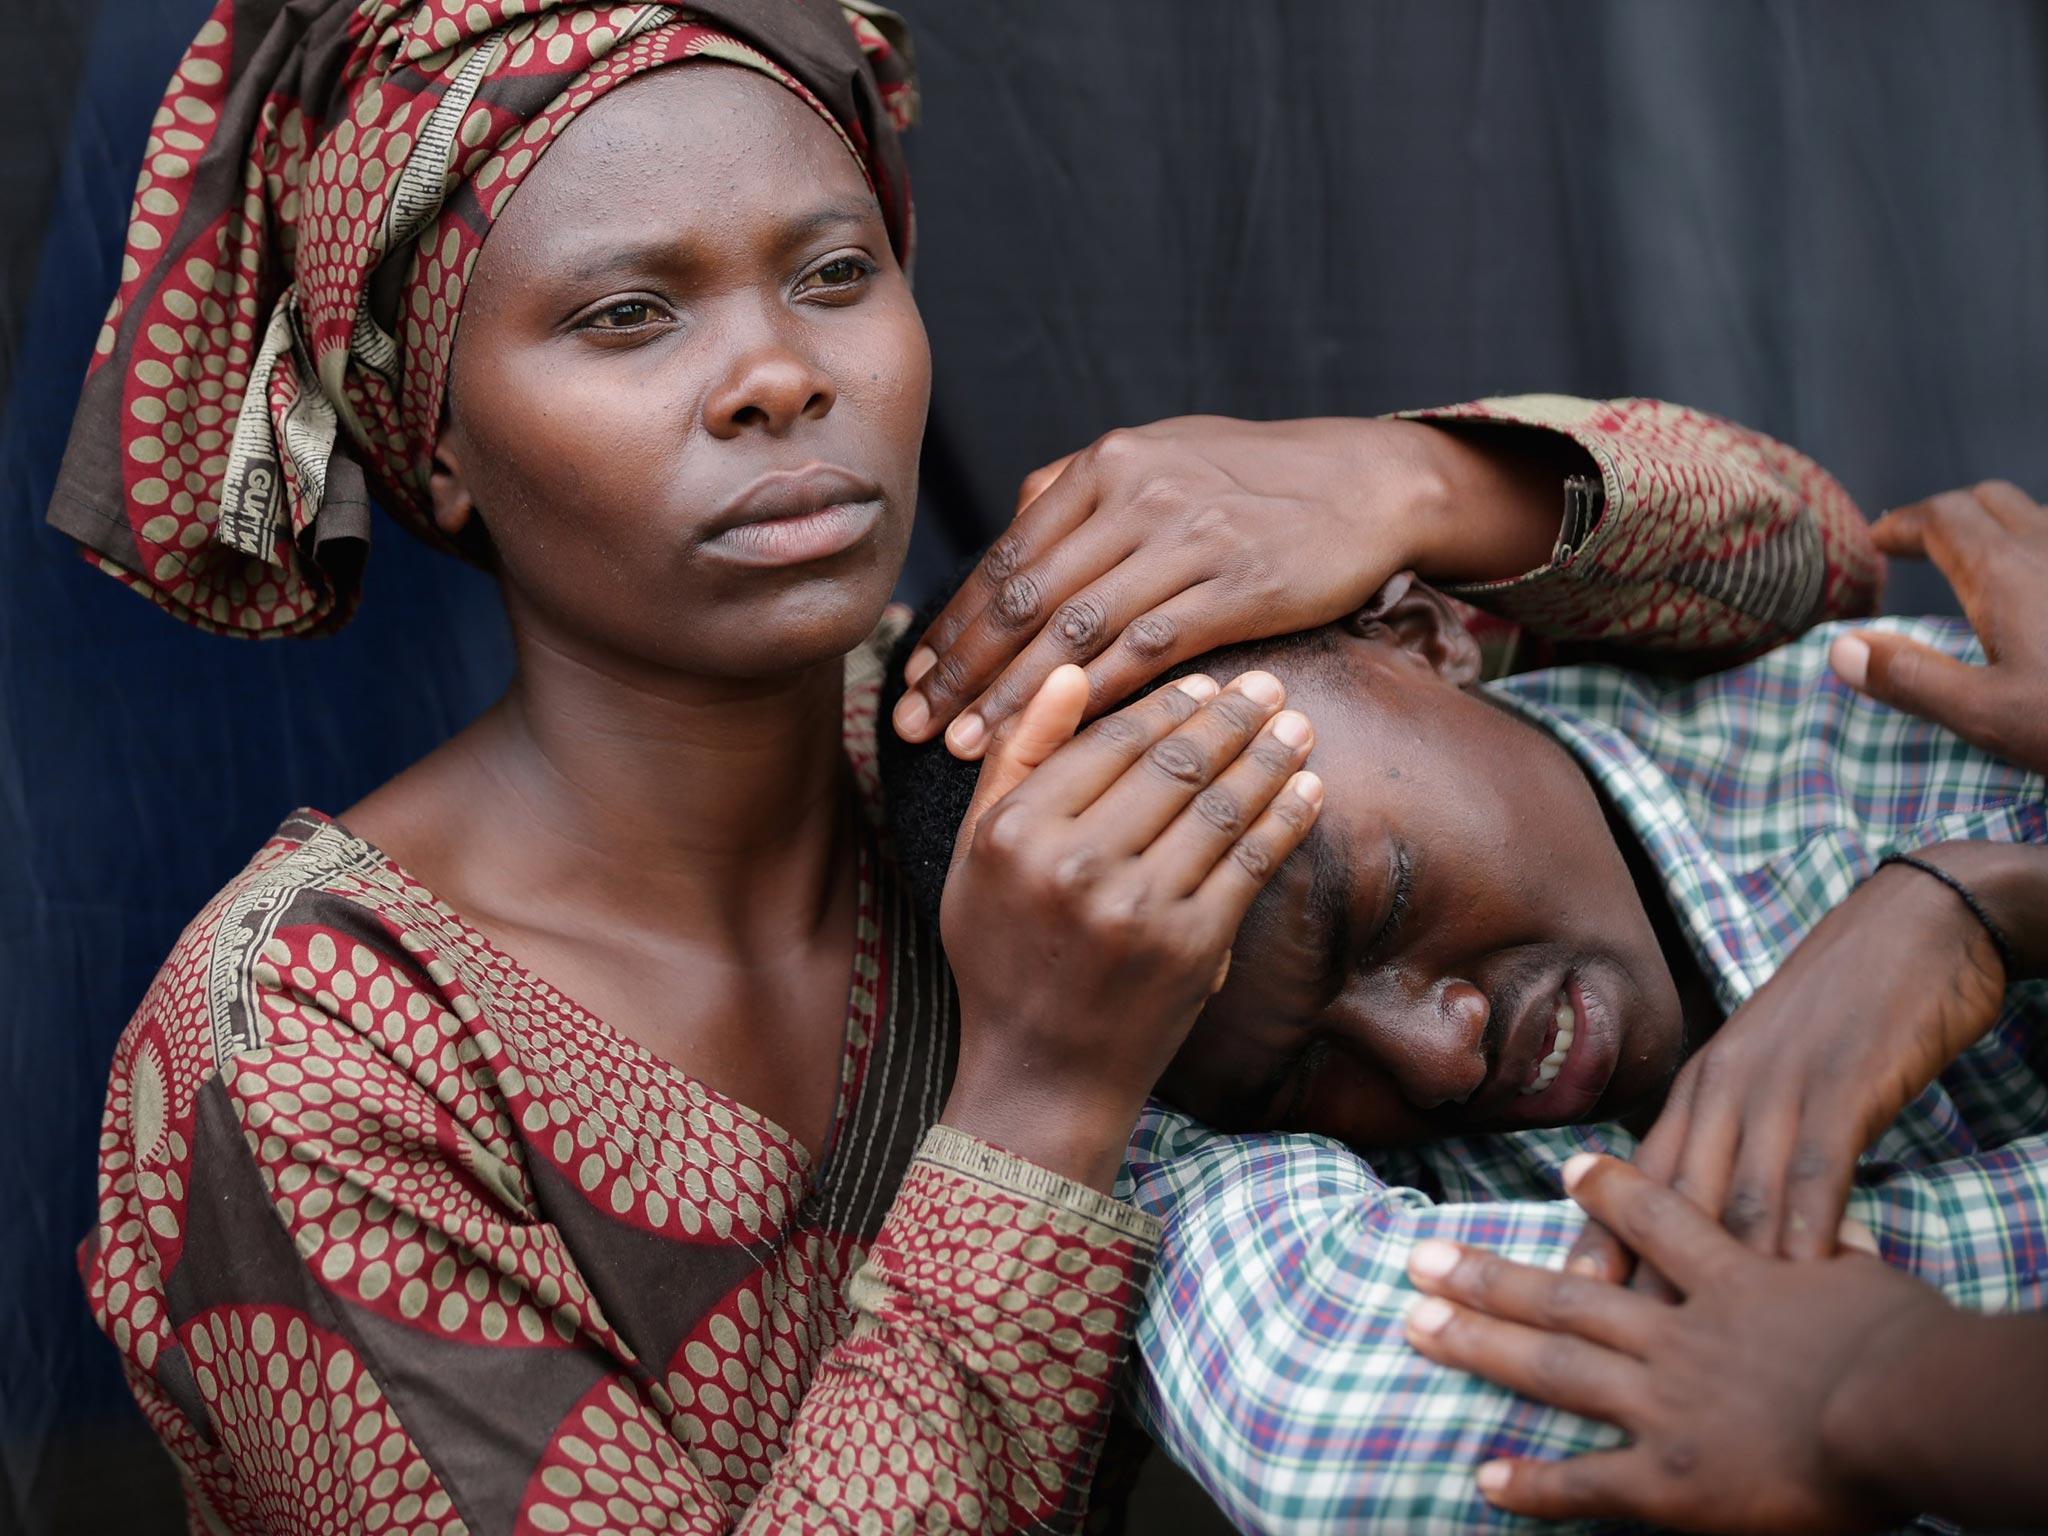 Mourners at the ceremony in Kigali, where Rwandan President
Paul Kagame renewed his accusations that France had been
complicit in the massacre of 800,000 people